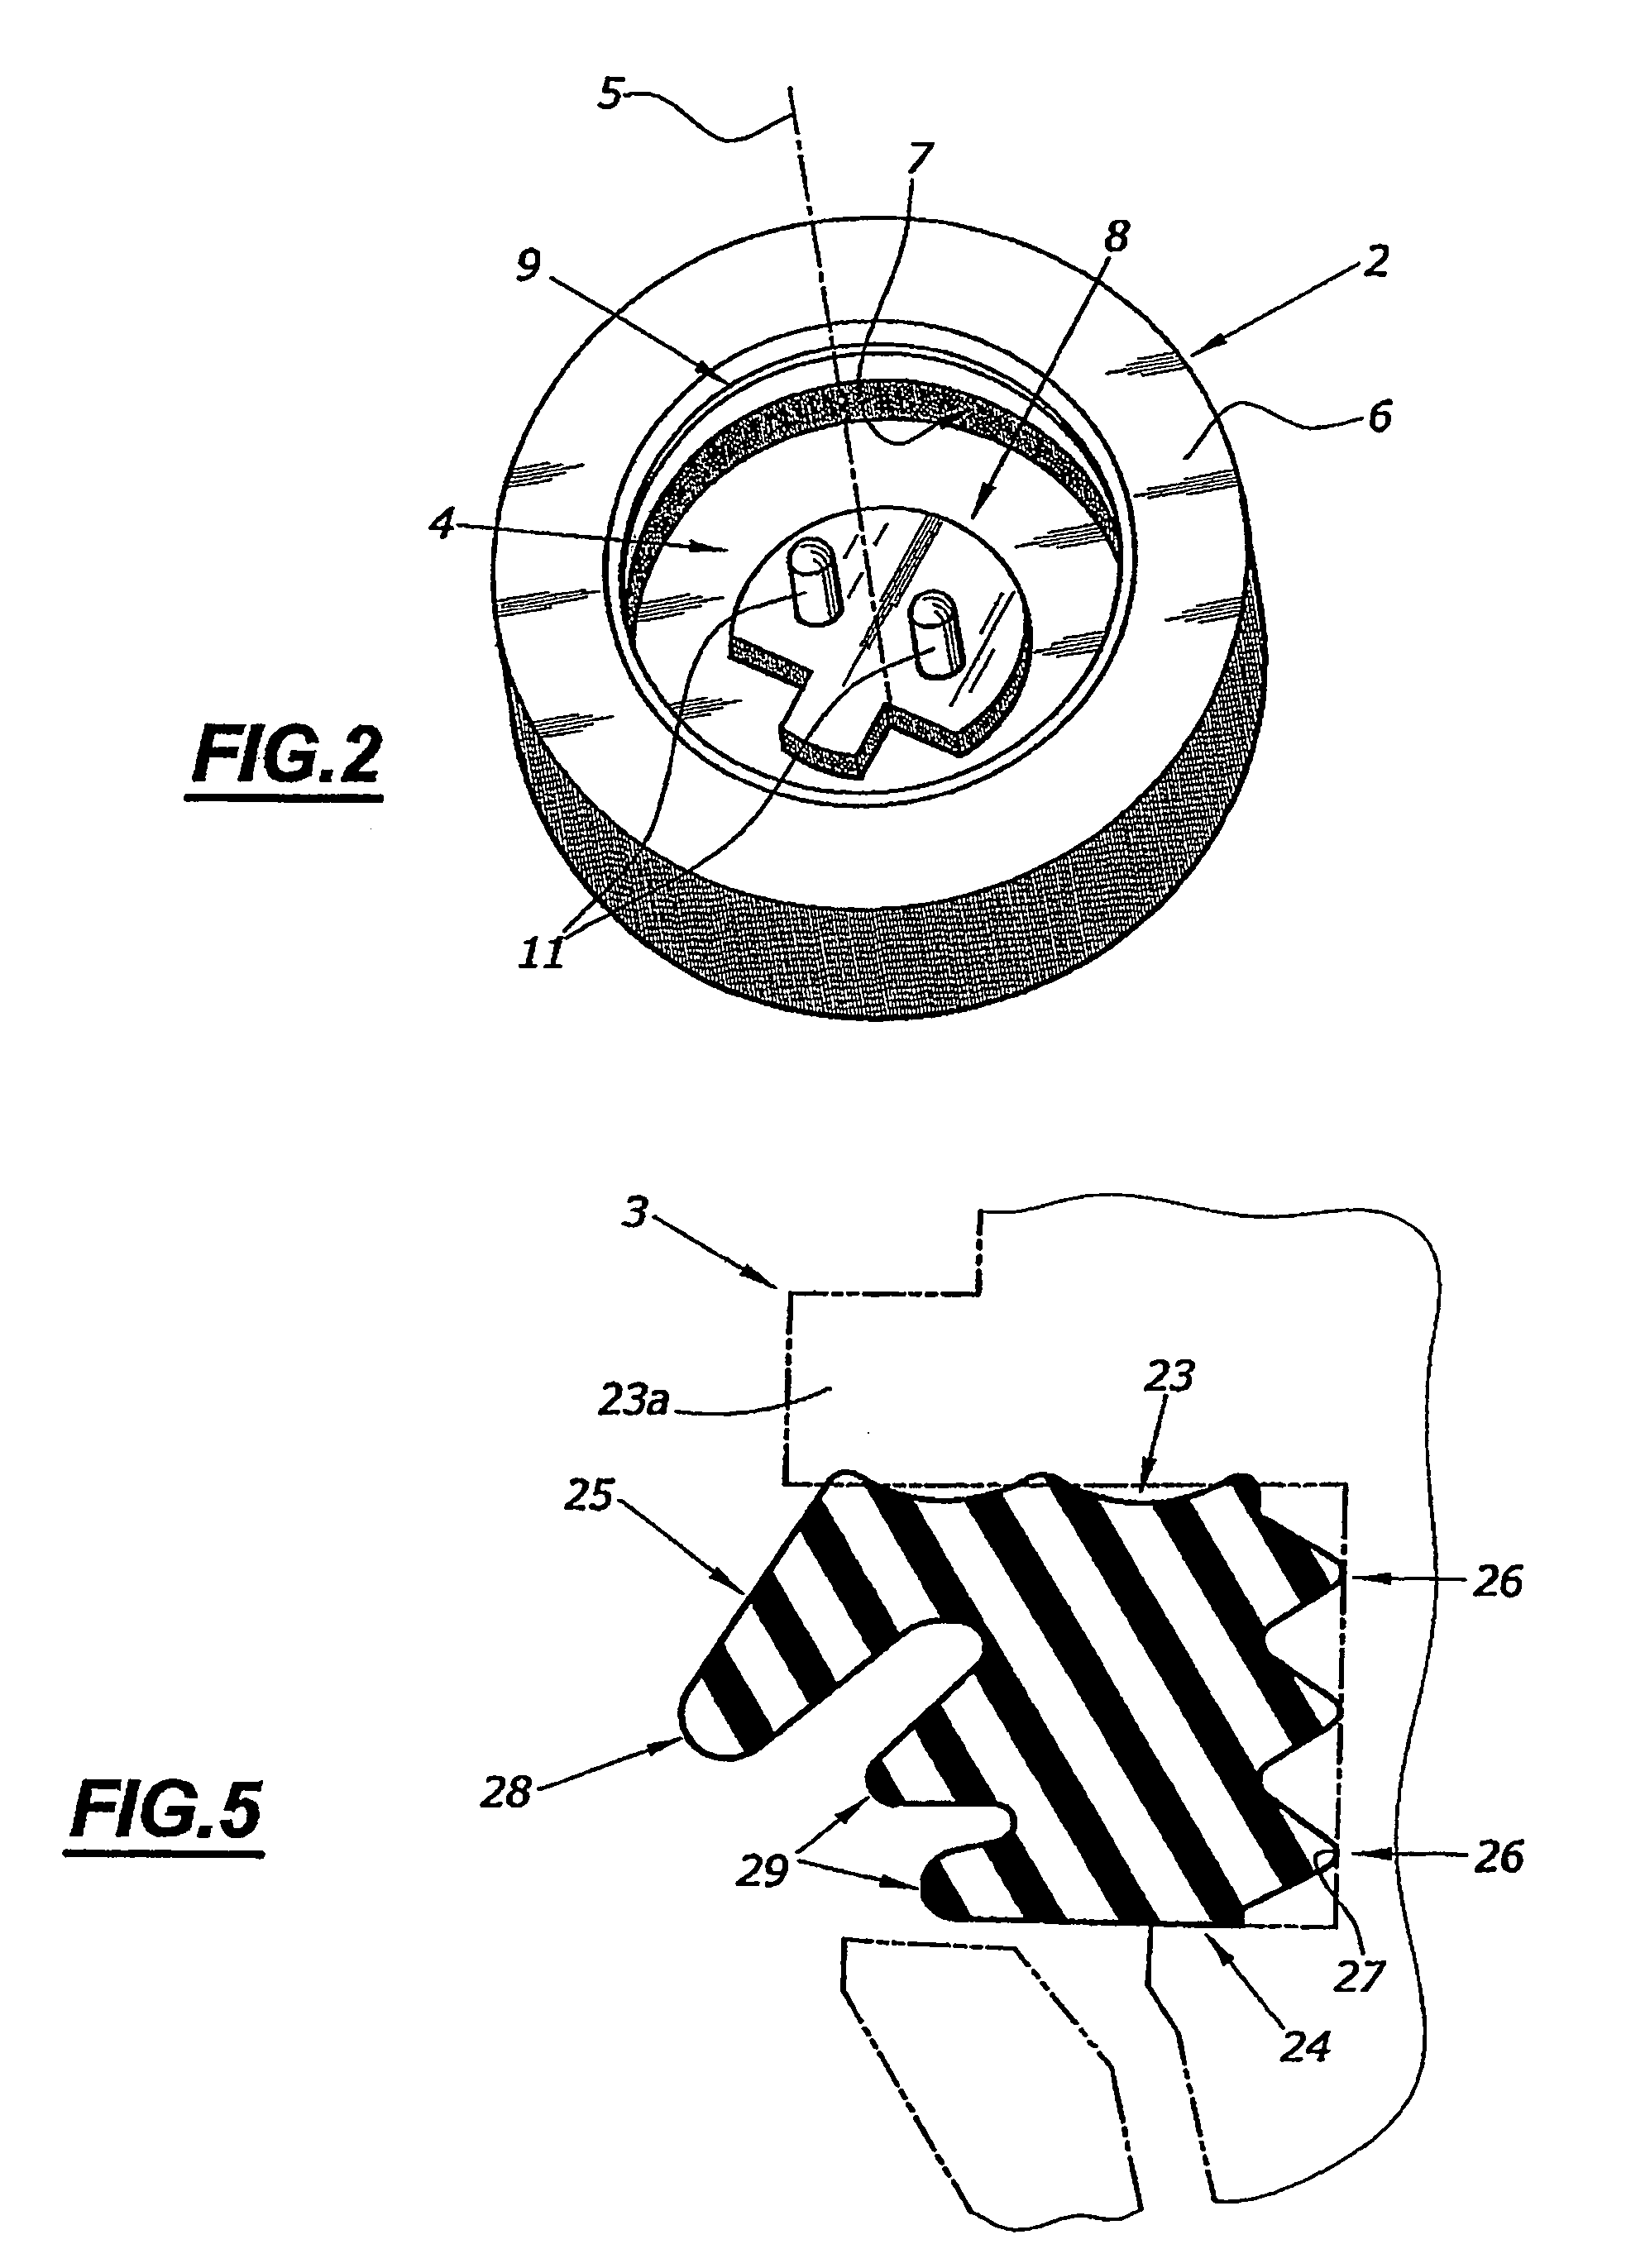 Electrical connector assembly for an airbag ignitor